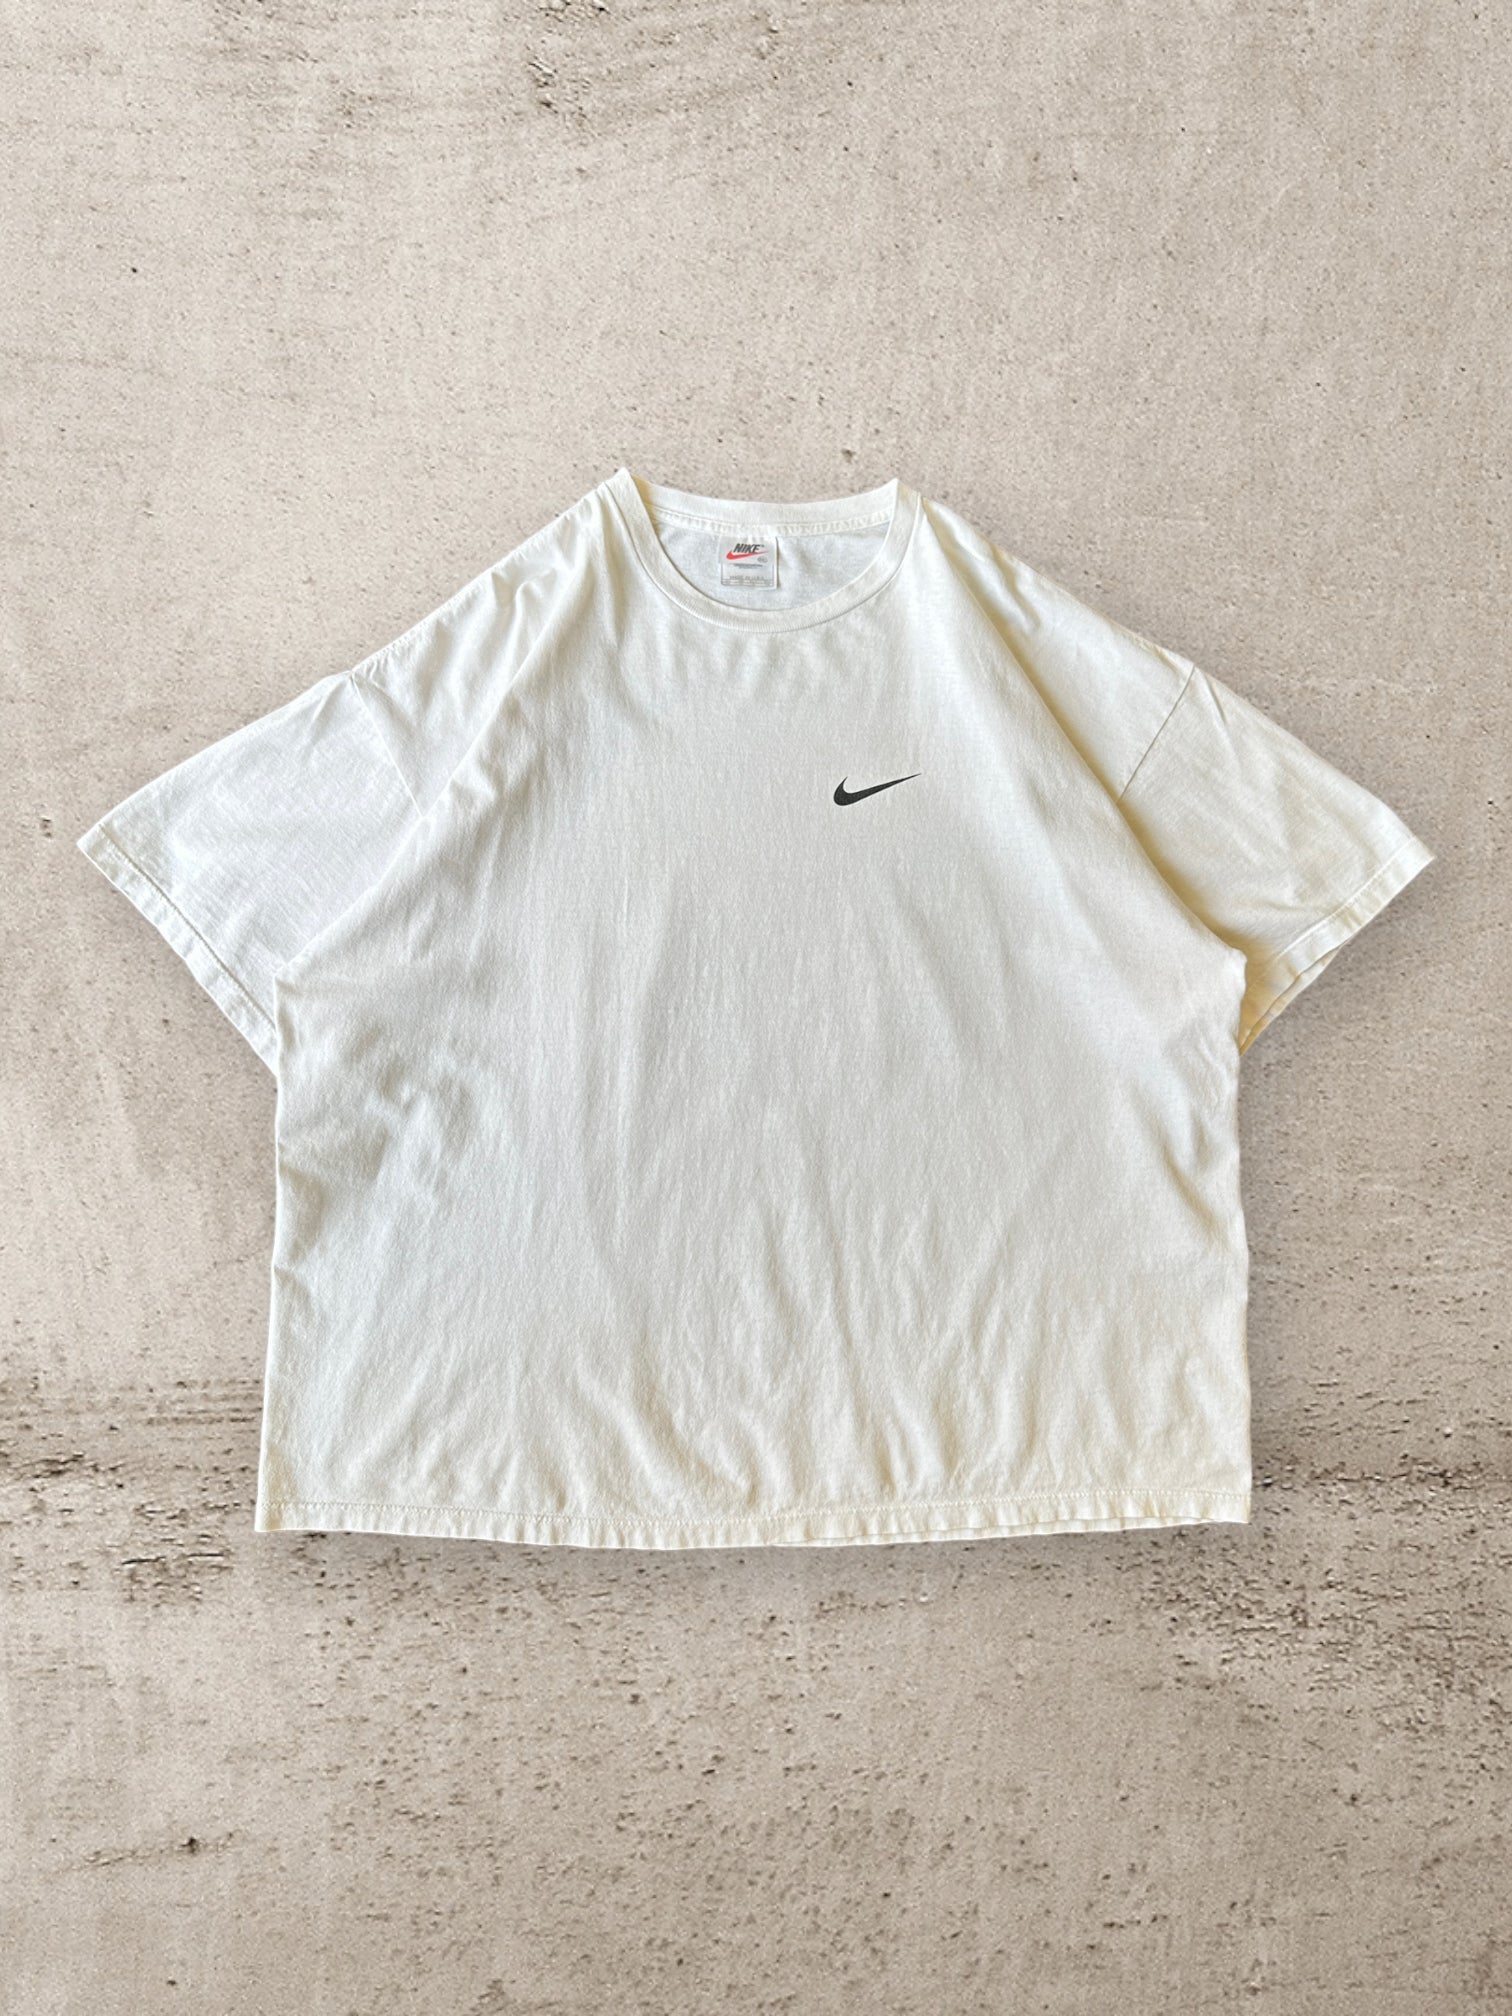 90s Nike Soccer Just Do It Graphic T-Shirt - XXL